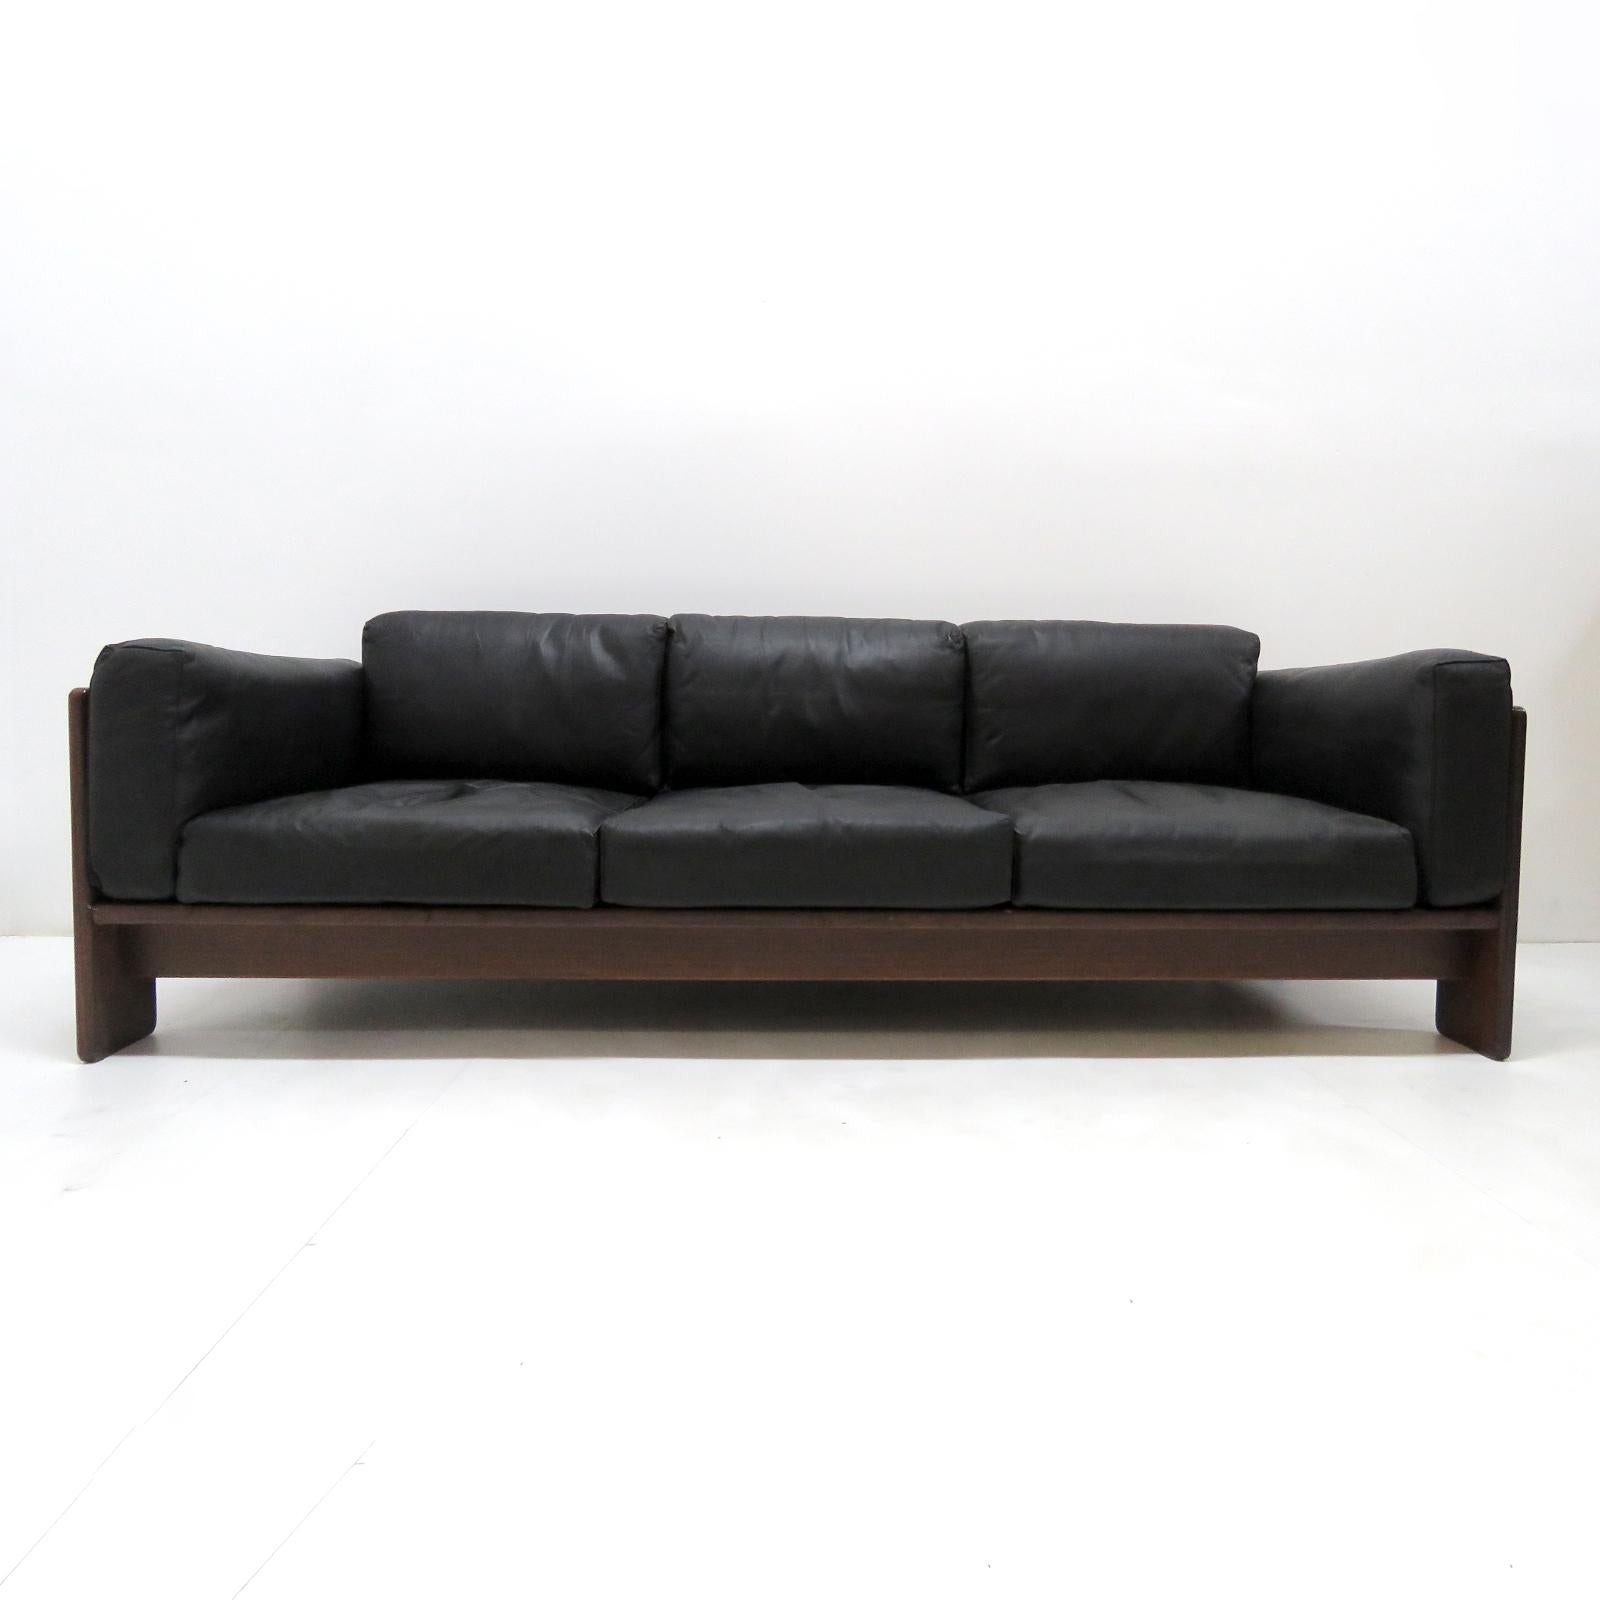 Wonderful large-scale 3-seat sofa 'Bastiano' in Brazilian rosewood (Rio Palisander) and black leather by Tobia Scarpa for Gavina - Italy, 1962, marked.